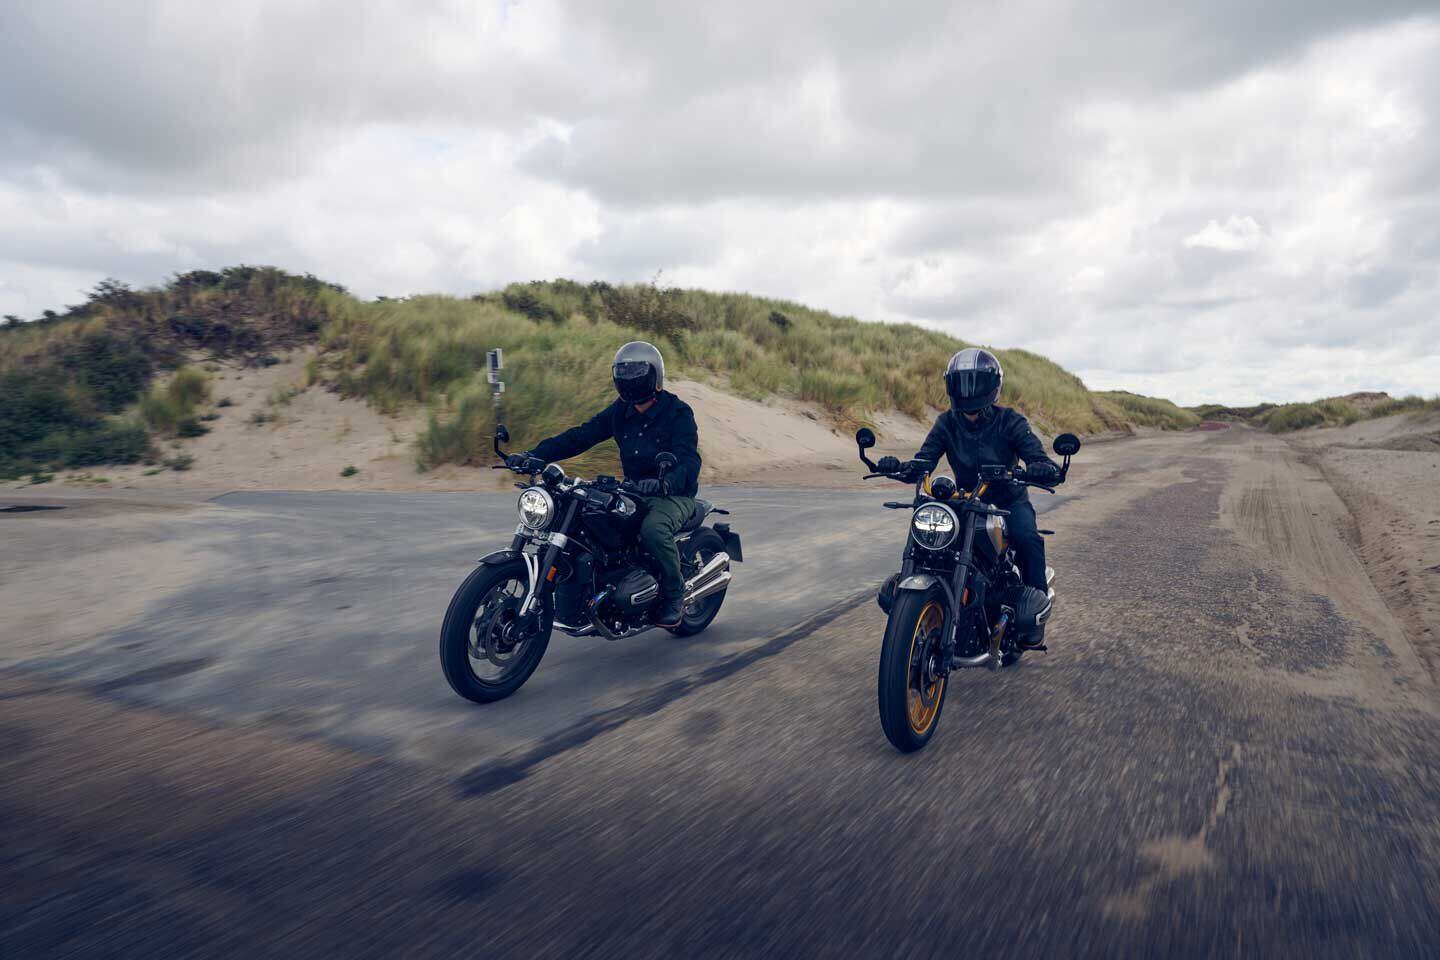 Pricing for the R 12 and R 12 nineT will be announced early next year.